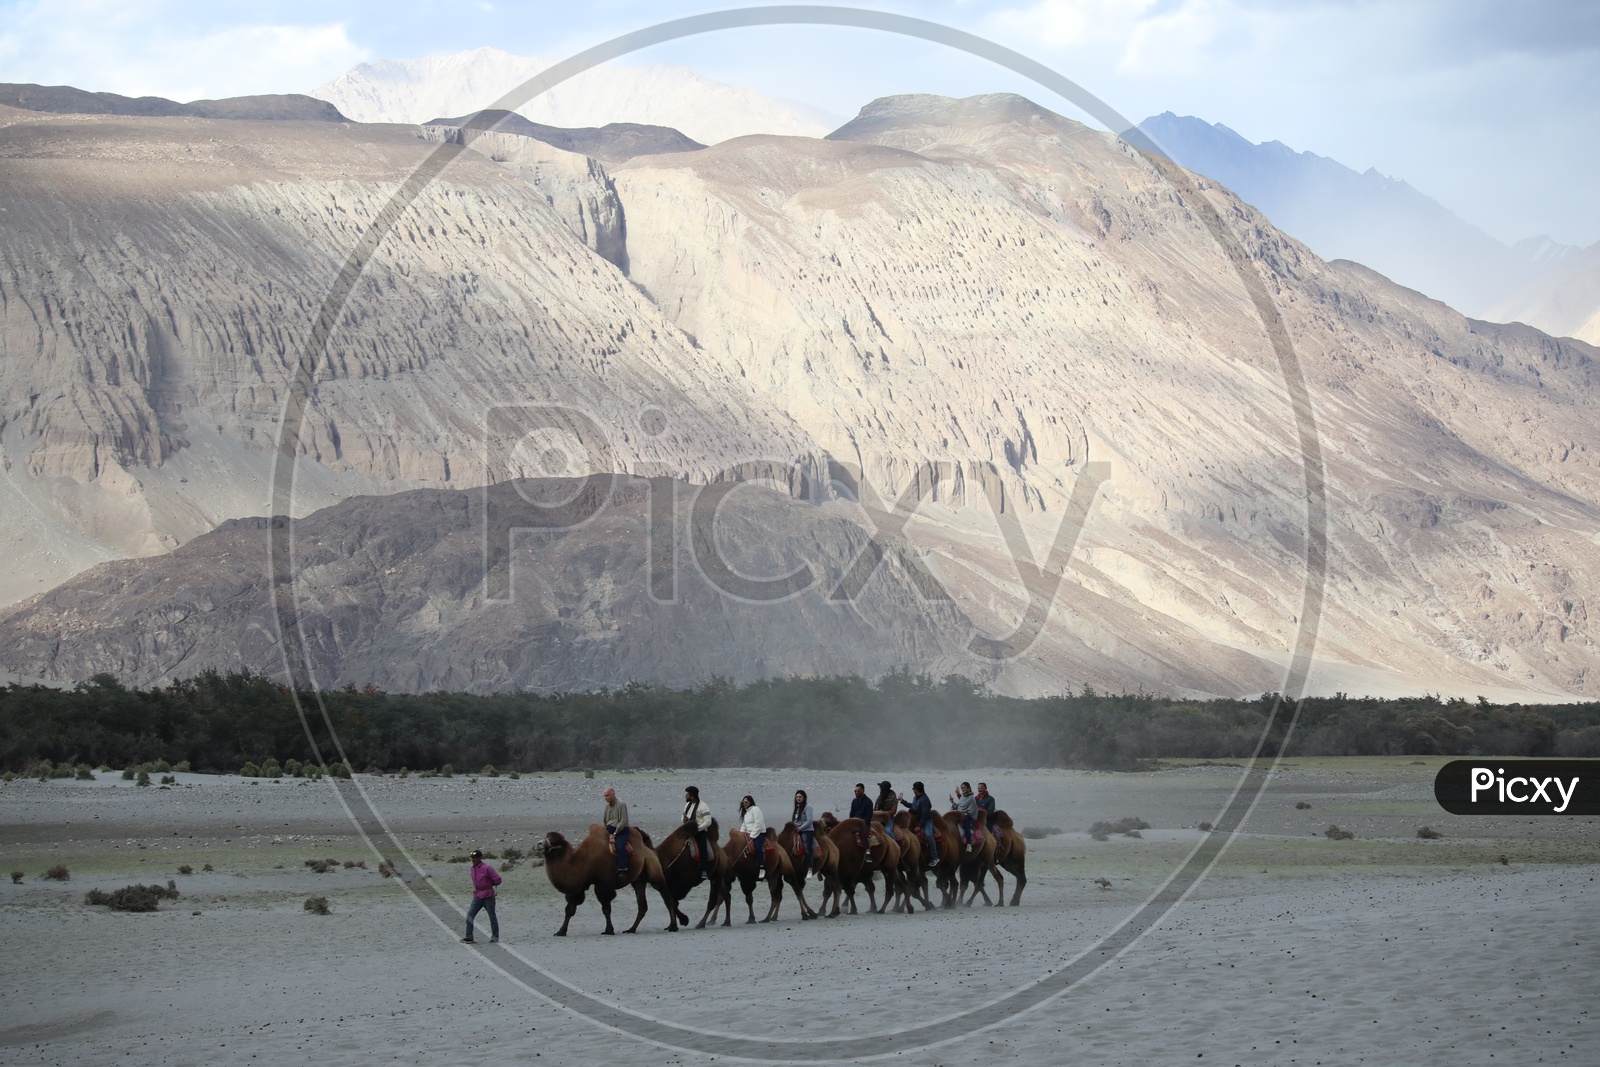 Tourists Using Backtrian Camels / Two - Hooded Camels For Commuting In Leh / Ladakh   / Nubra Valley Camel Rides